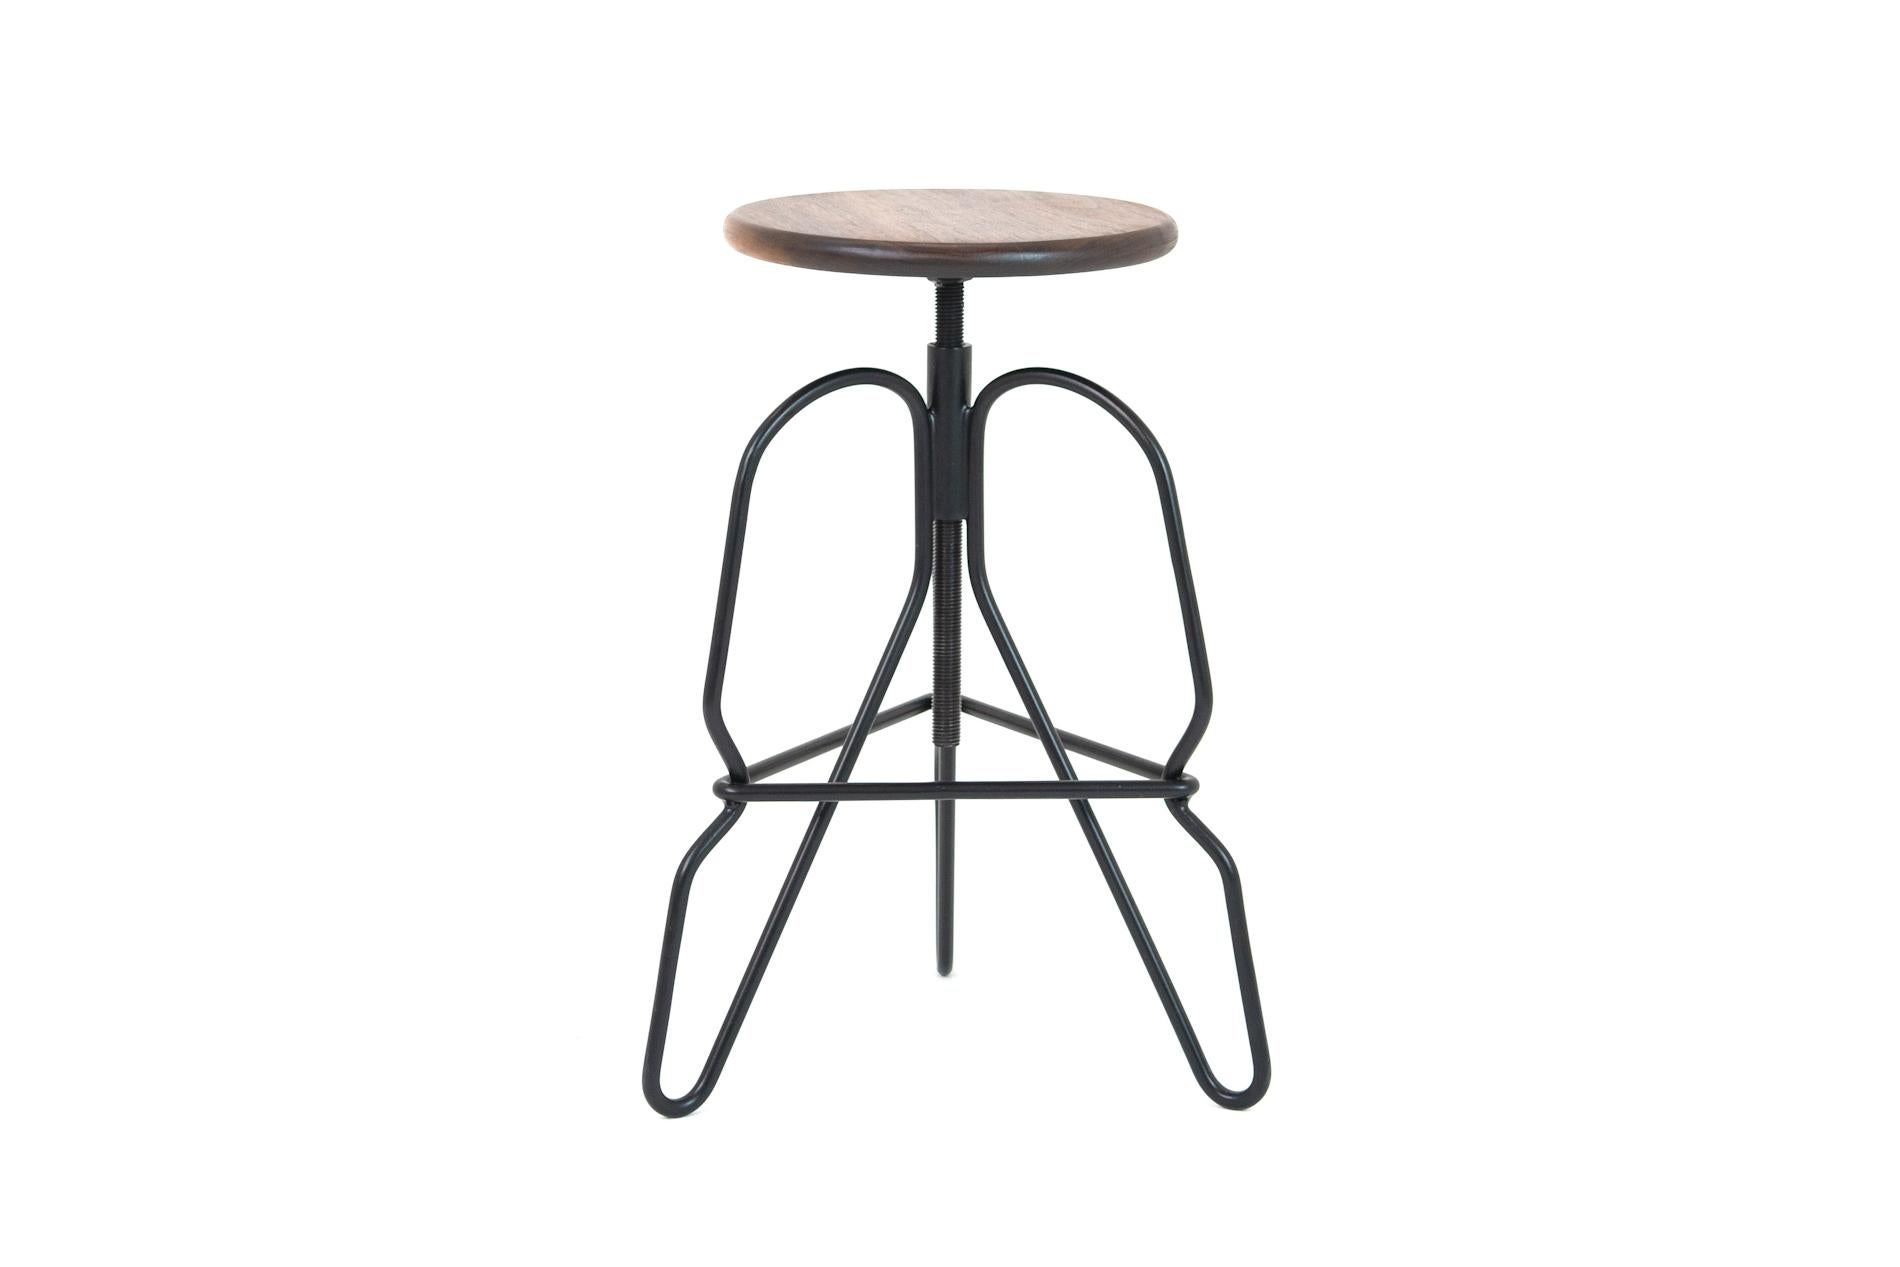 The rig stool is a minimal solid steel stool featuring an adjustable solid wood seat on a threaded rod. The legs are tied together with a triangular footrest.

This handcrafted piece is hand-oiled using our in-house oils and techniques and